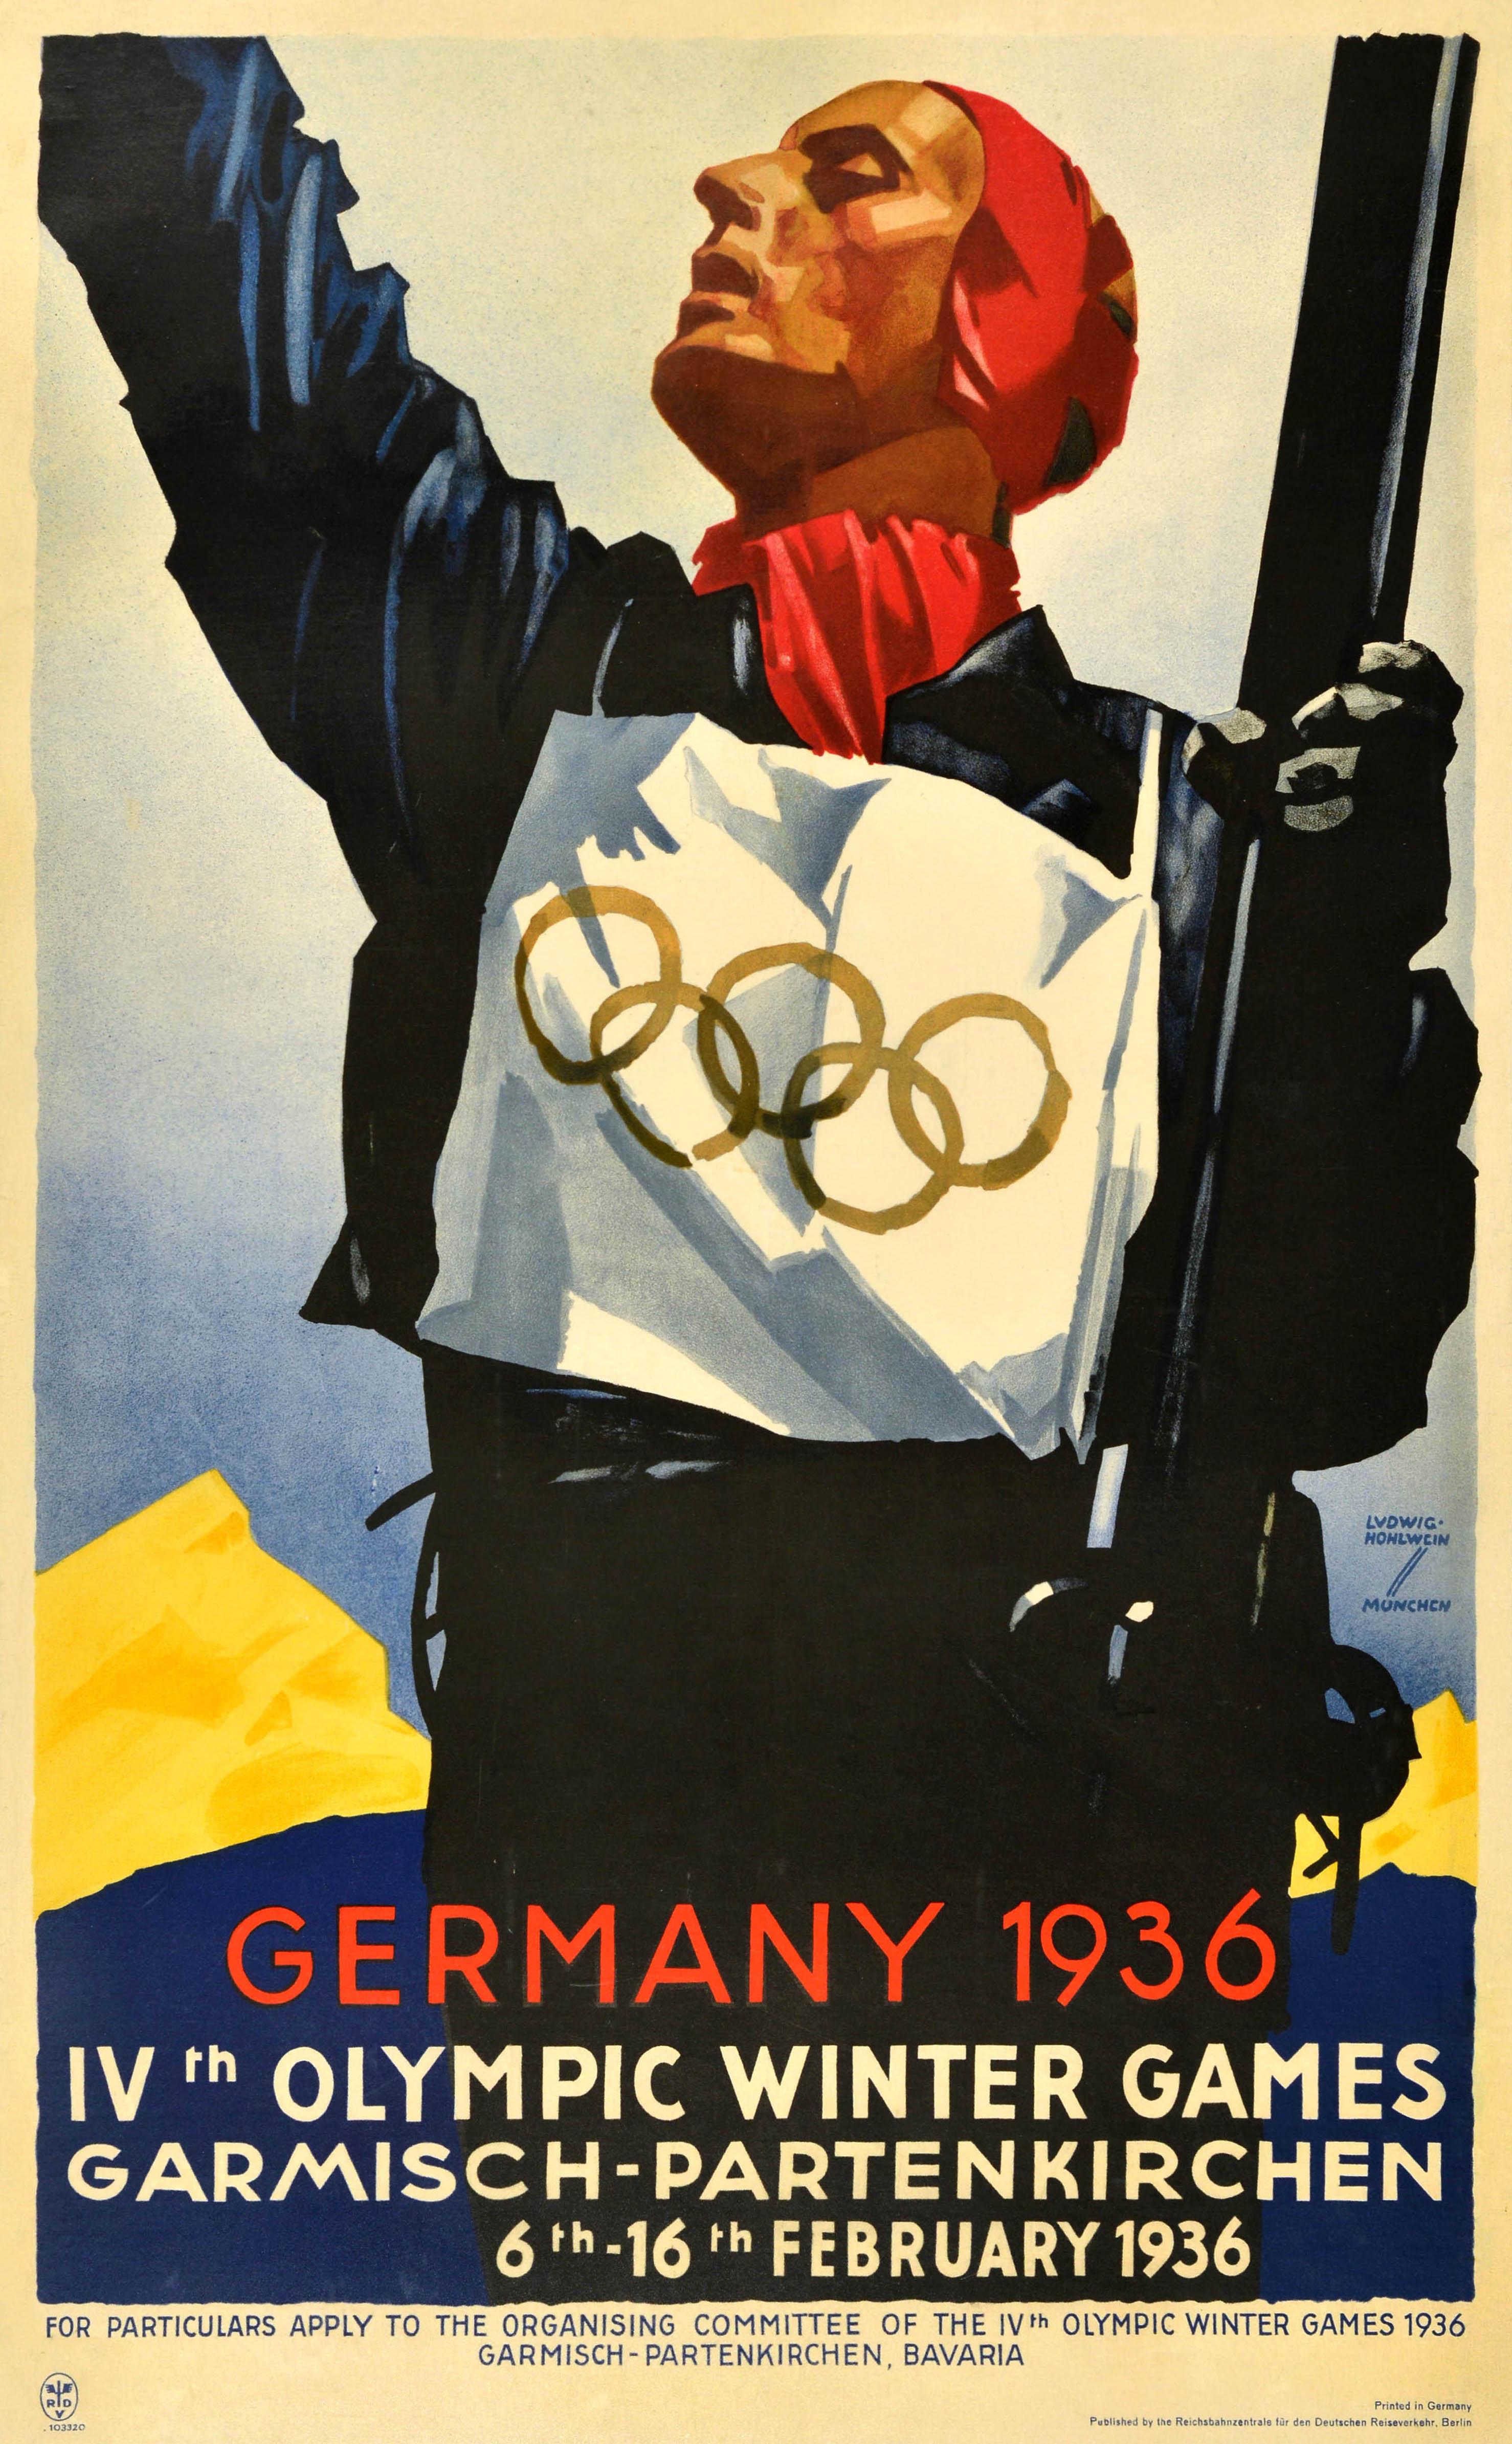 Original vintage sport poster - Germany 1936 IV Olympic Winter Games Garmisch Partenkirchen 6-16 February - featuring dynamic artwork by Ludwig Hohlwein (1874-1949) depicting a skier wearing a bib with the Olympic rings symbol on it, holding his